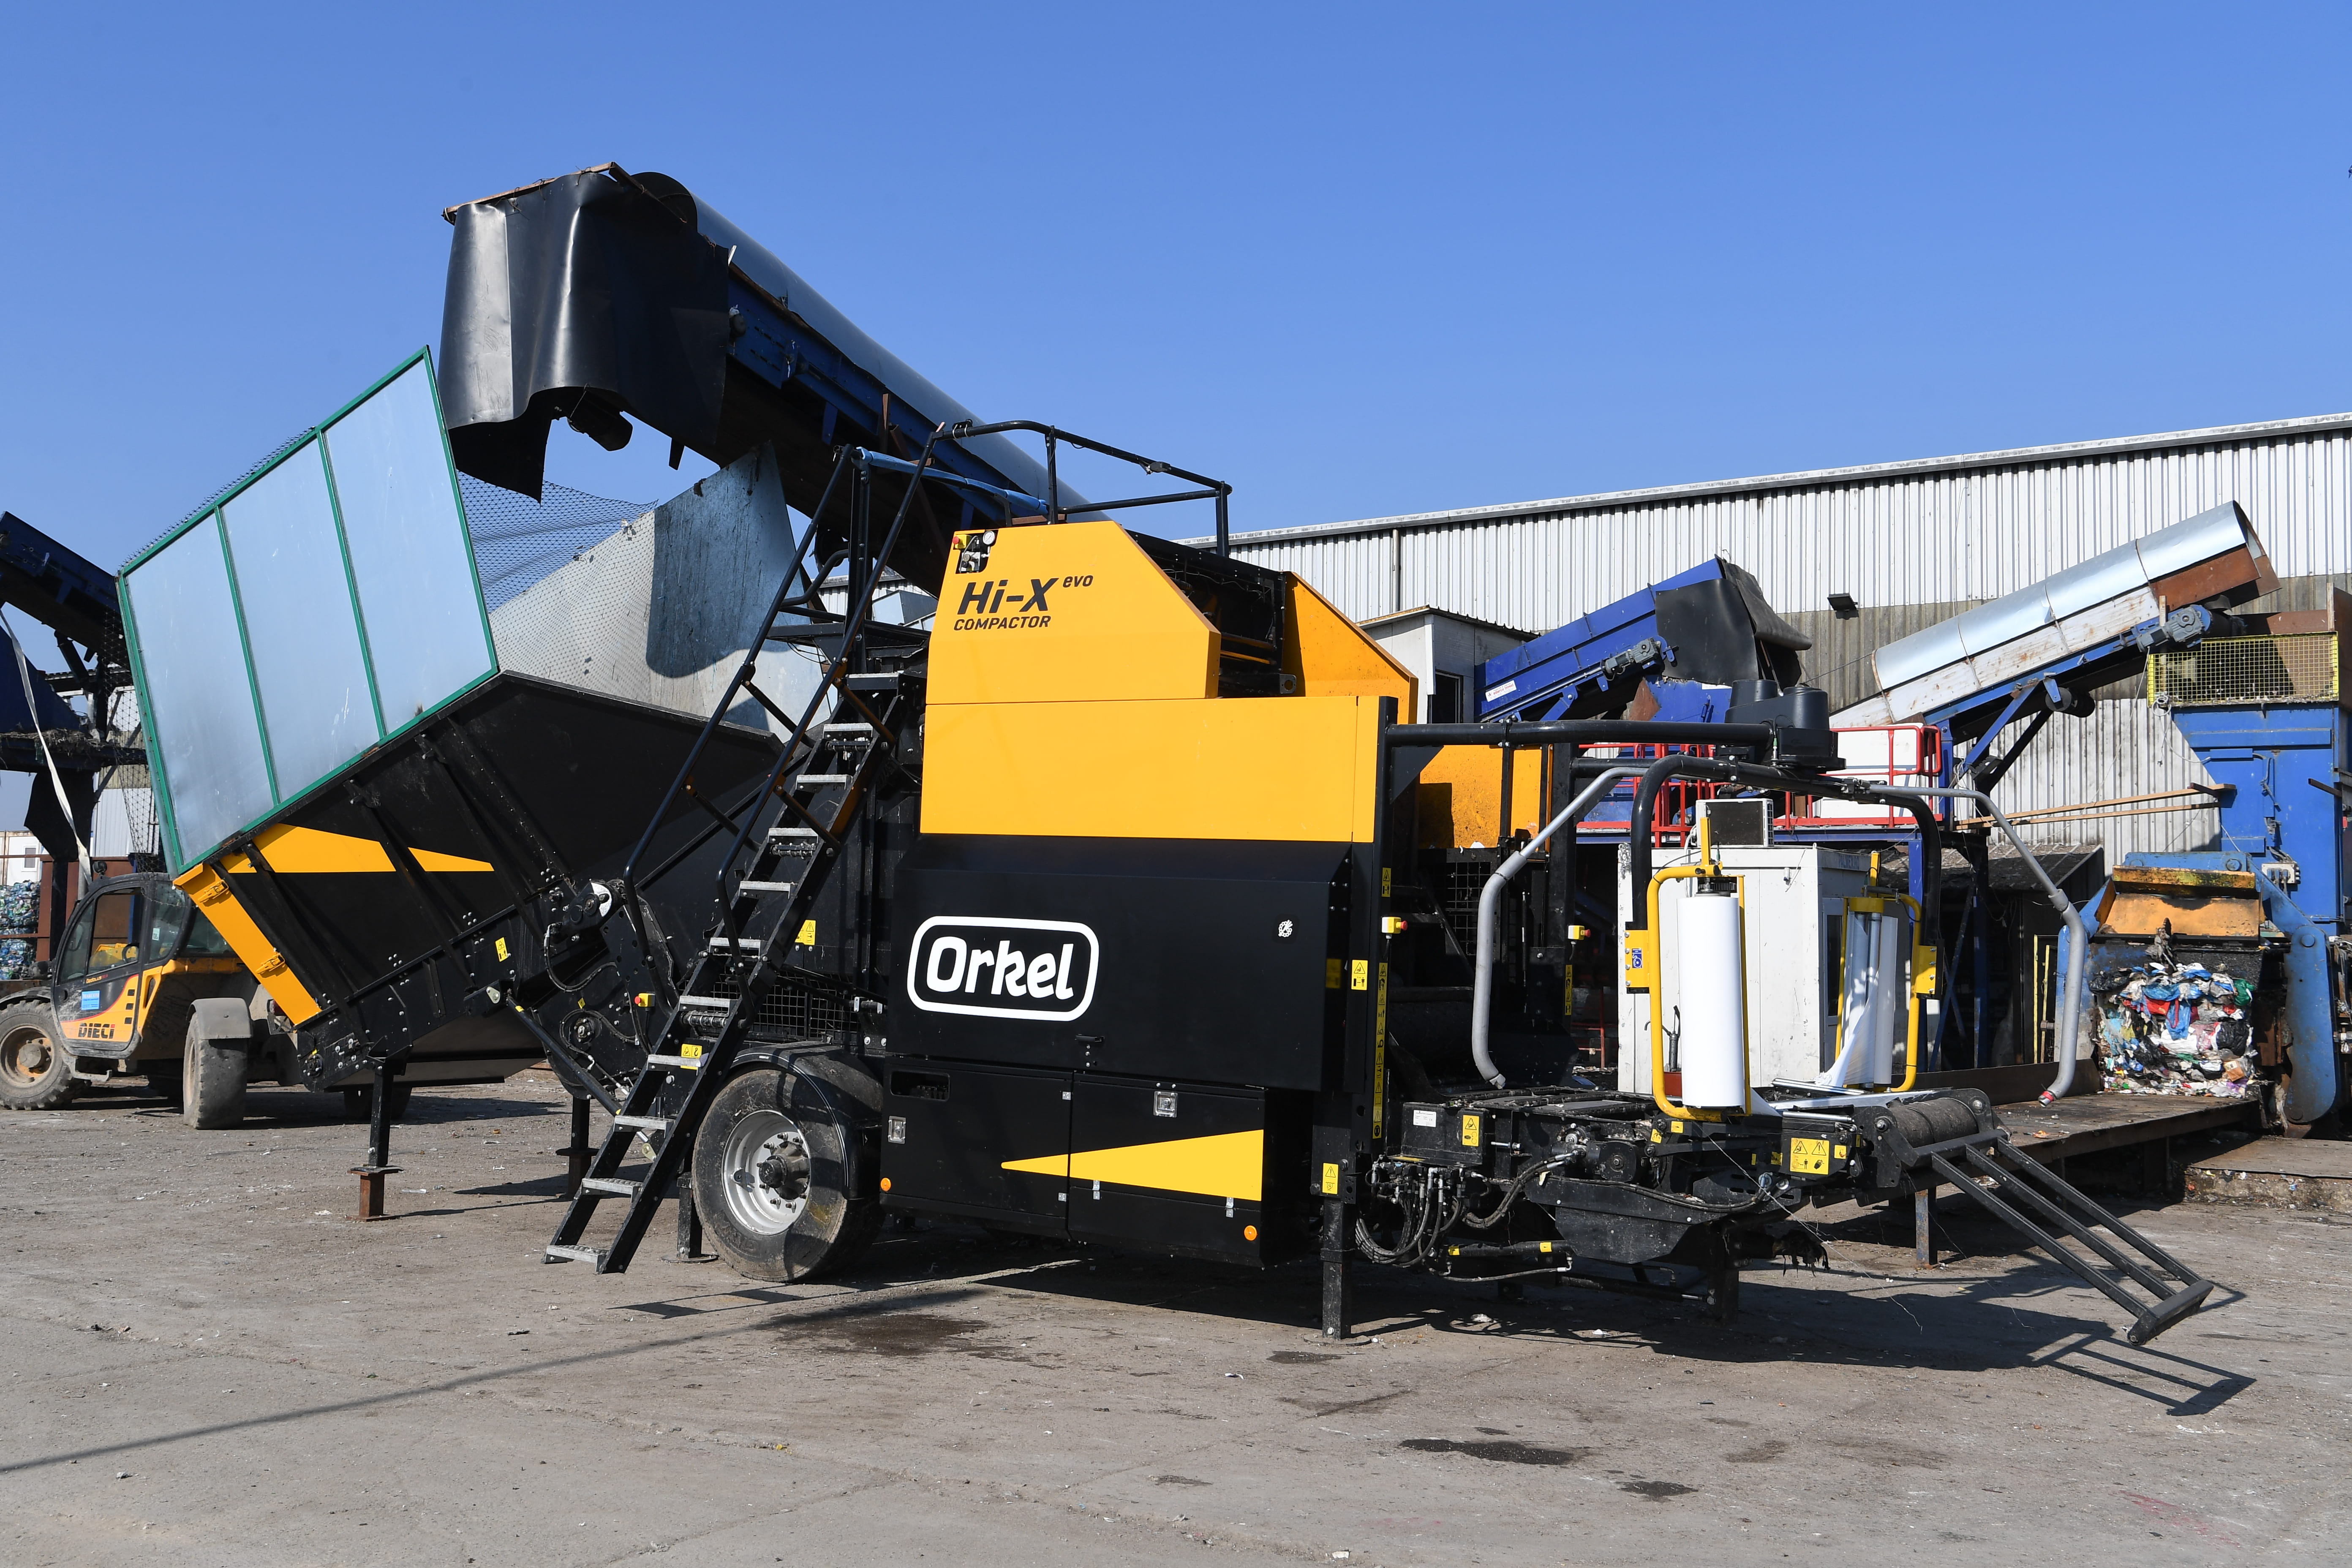 A Hi-X evo compactor in an industrial location under a blue sky.